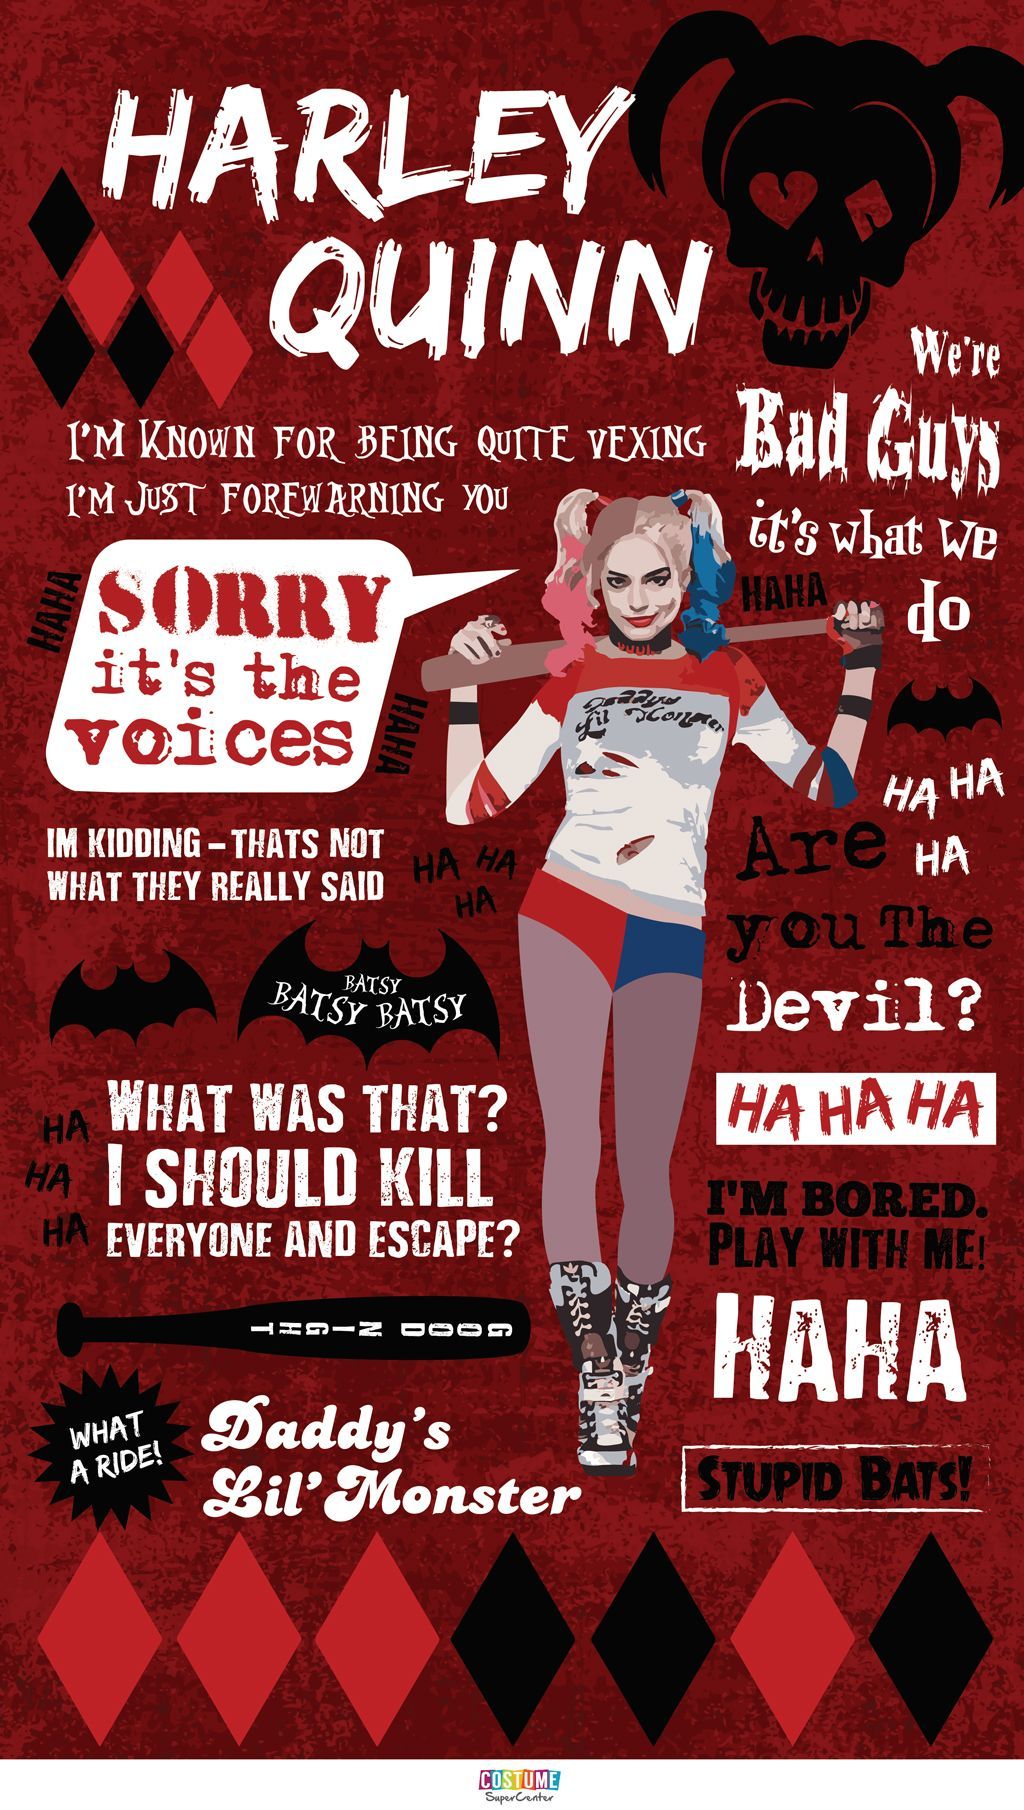 Quotes by the always vexing Harley Quinn in time for the Suicide Squad premiere!